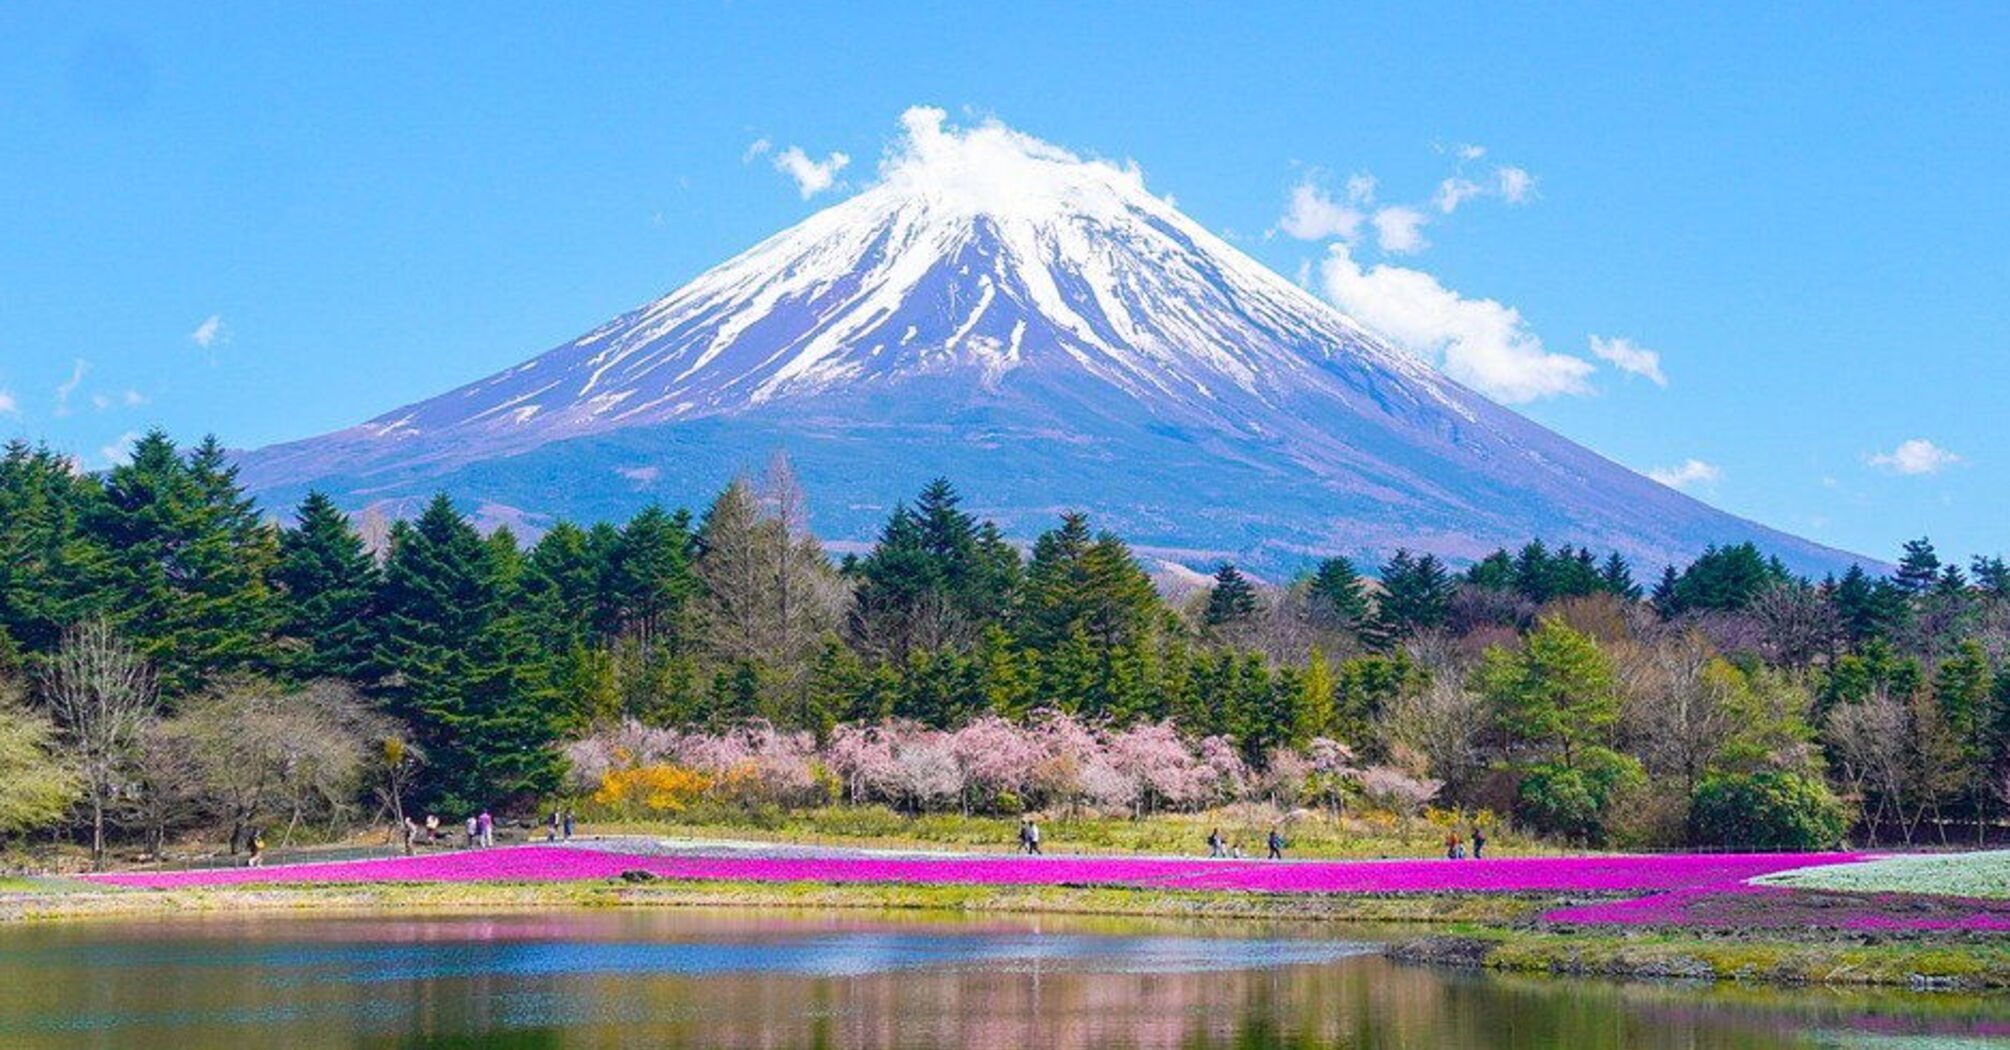 Mount Fuji imposes restrictions on the number of visitors per day and entrance fees